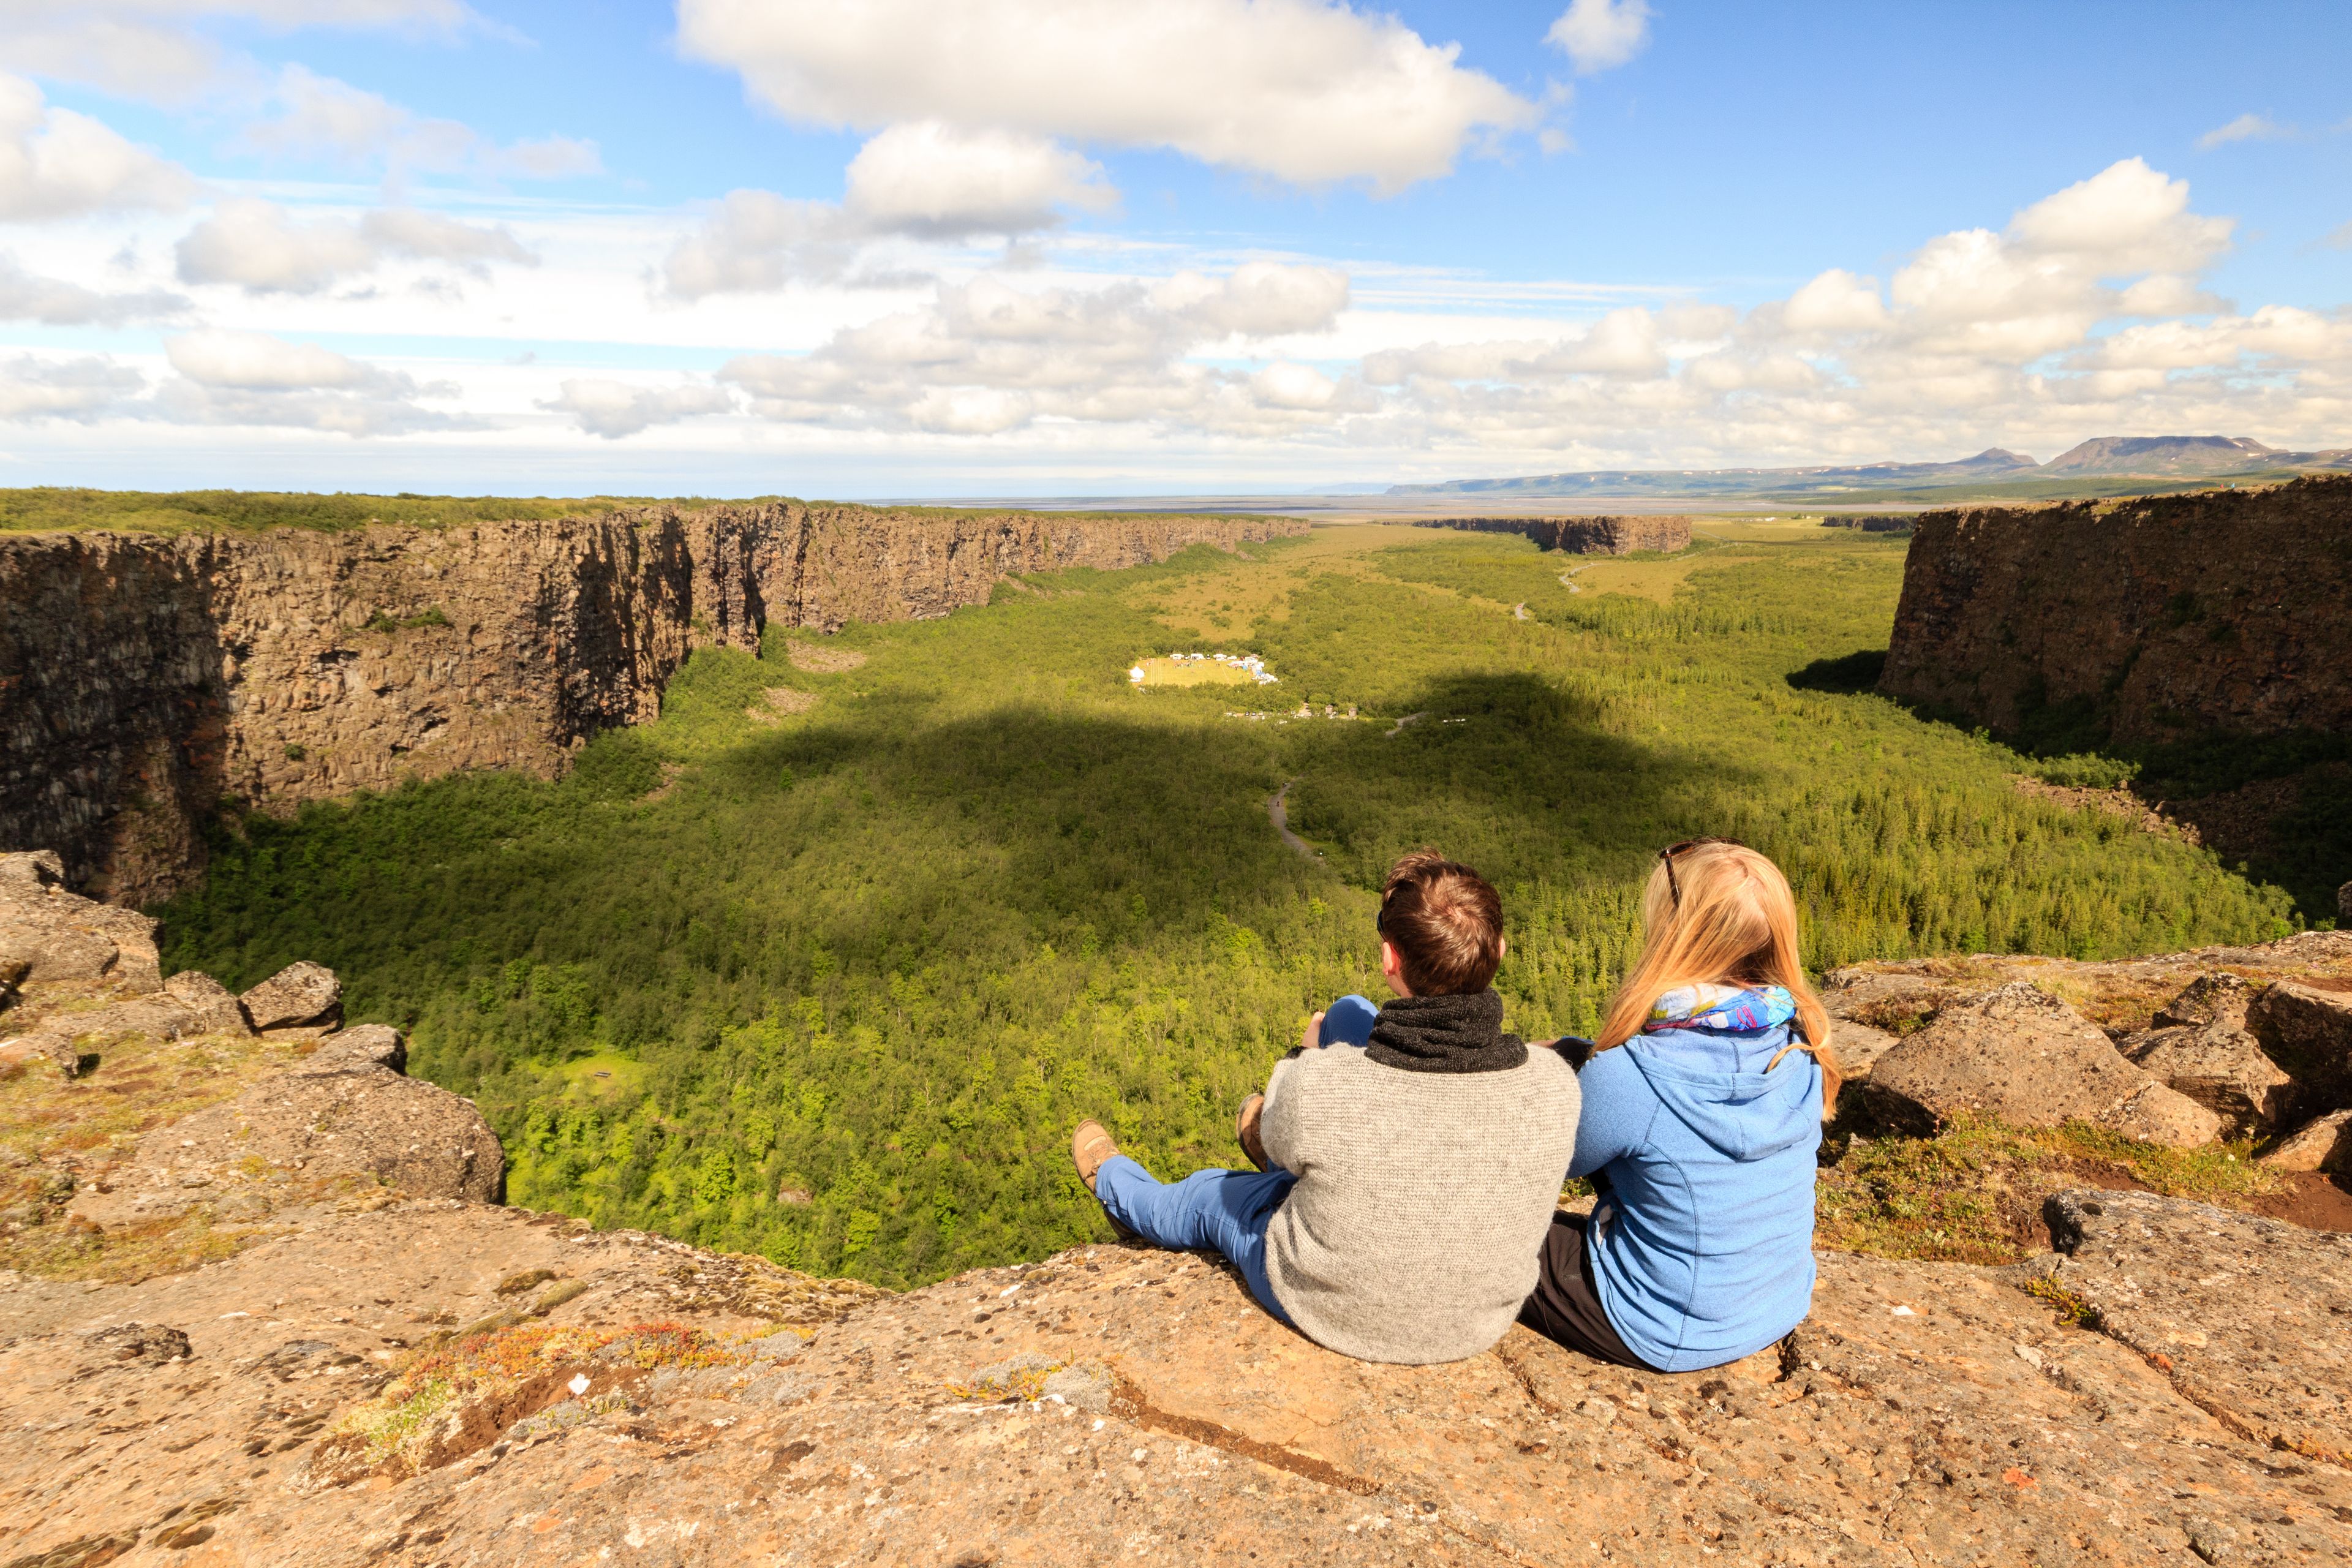 Two walkers sitting and admiring the view they have on the Ásbyrgi canyon